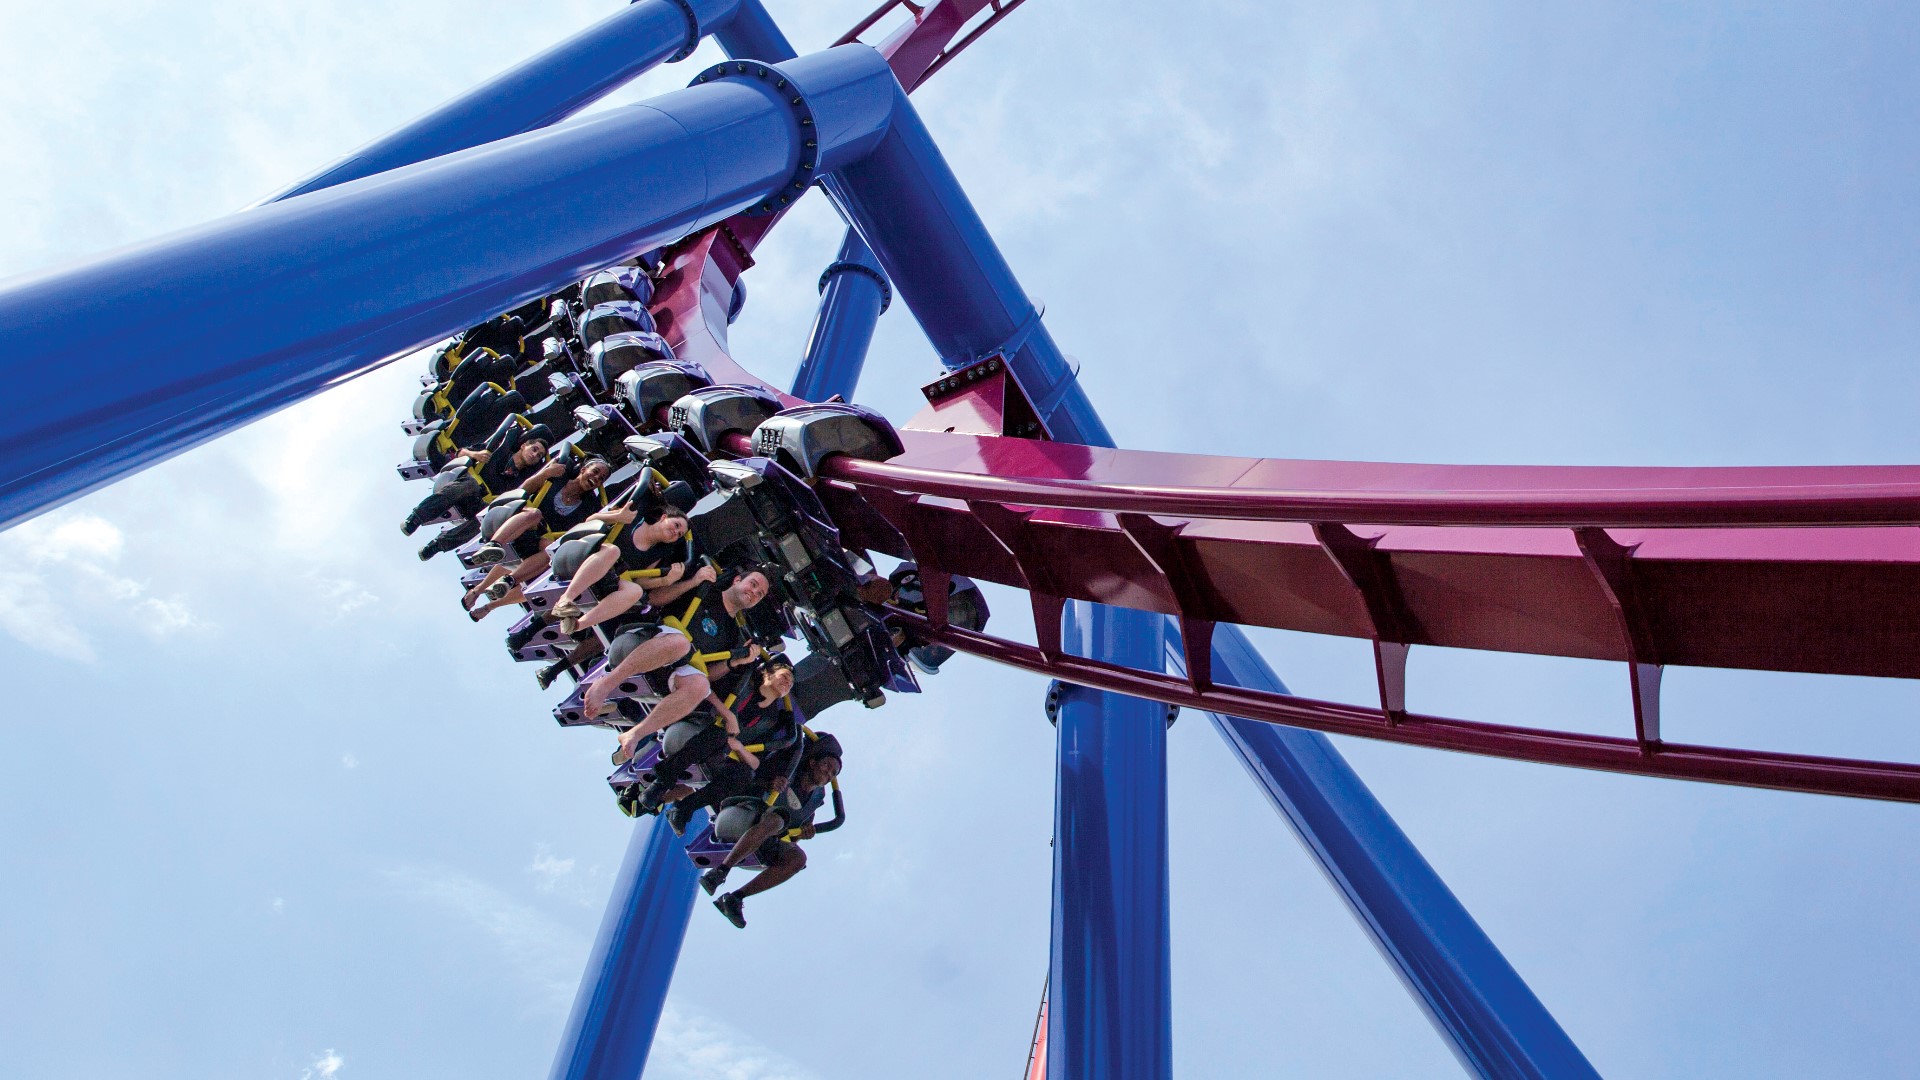 According to amusement park officials, a guest went into a restricted area of the Banshee roller coater and was believed to have been hit by the ride.